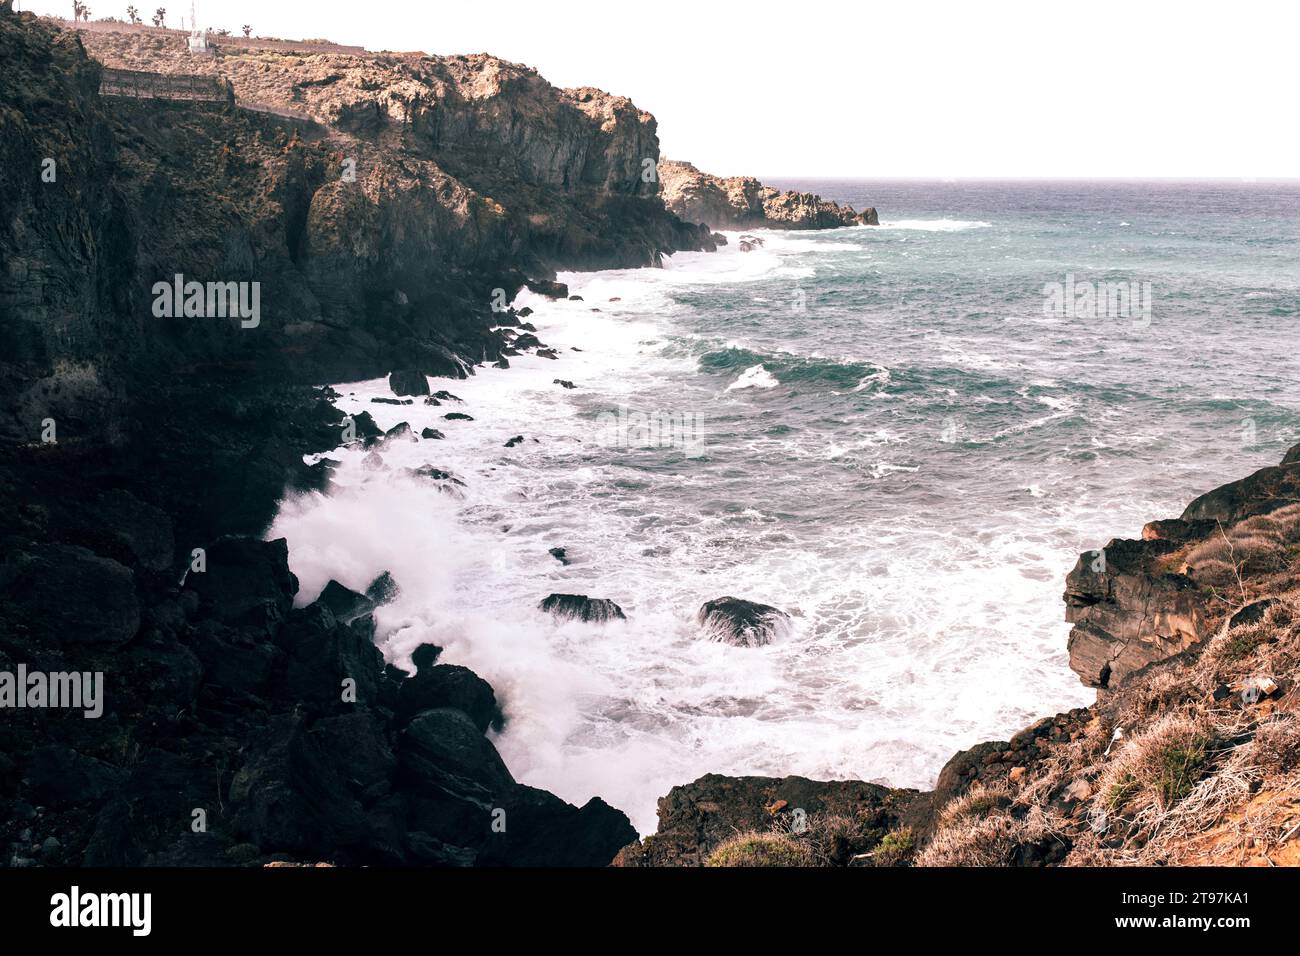 Coastal cliffs with waves breaking over rocks Stock Photo